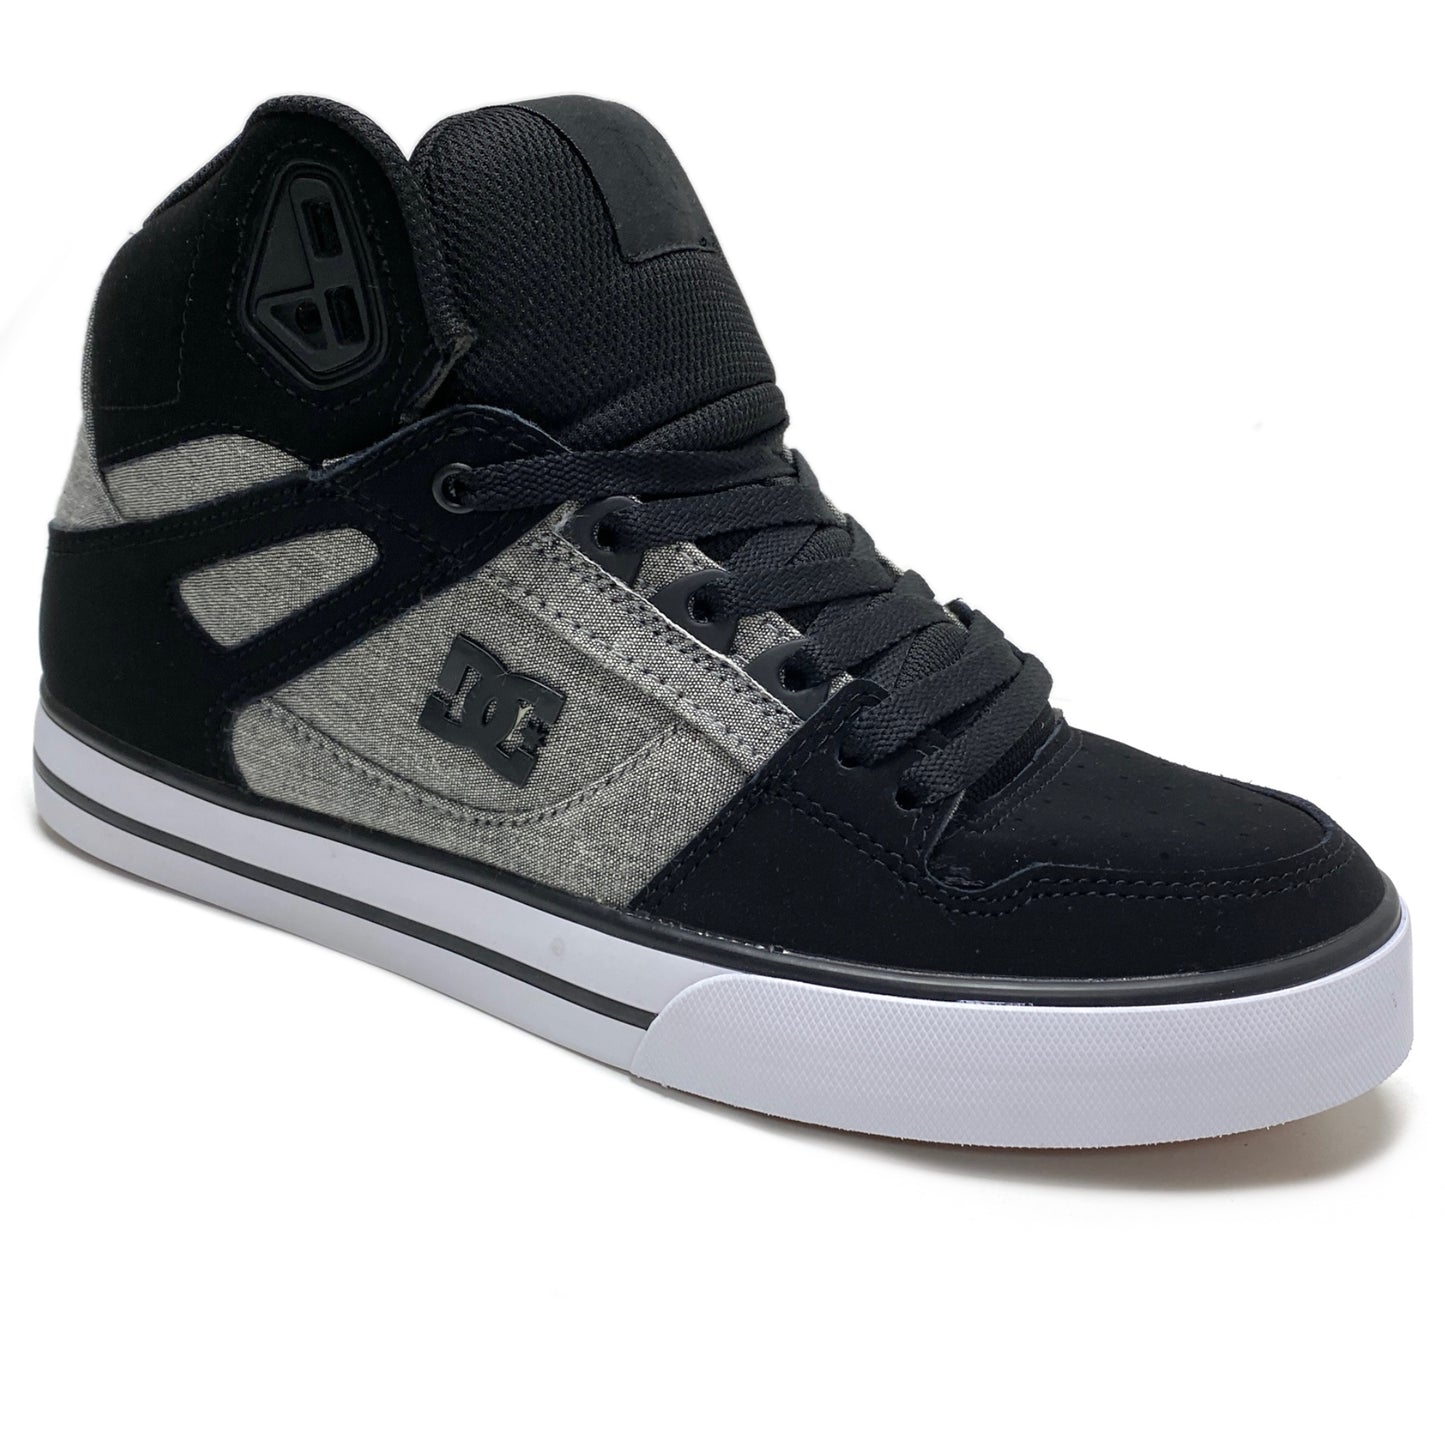 DC SHOES PURE HIGH TOP WC BLACK BATTLESHIP ARMOR TRAINERS